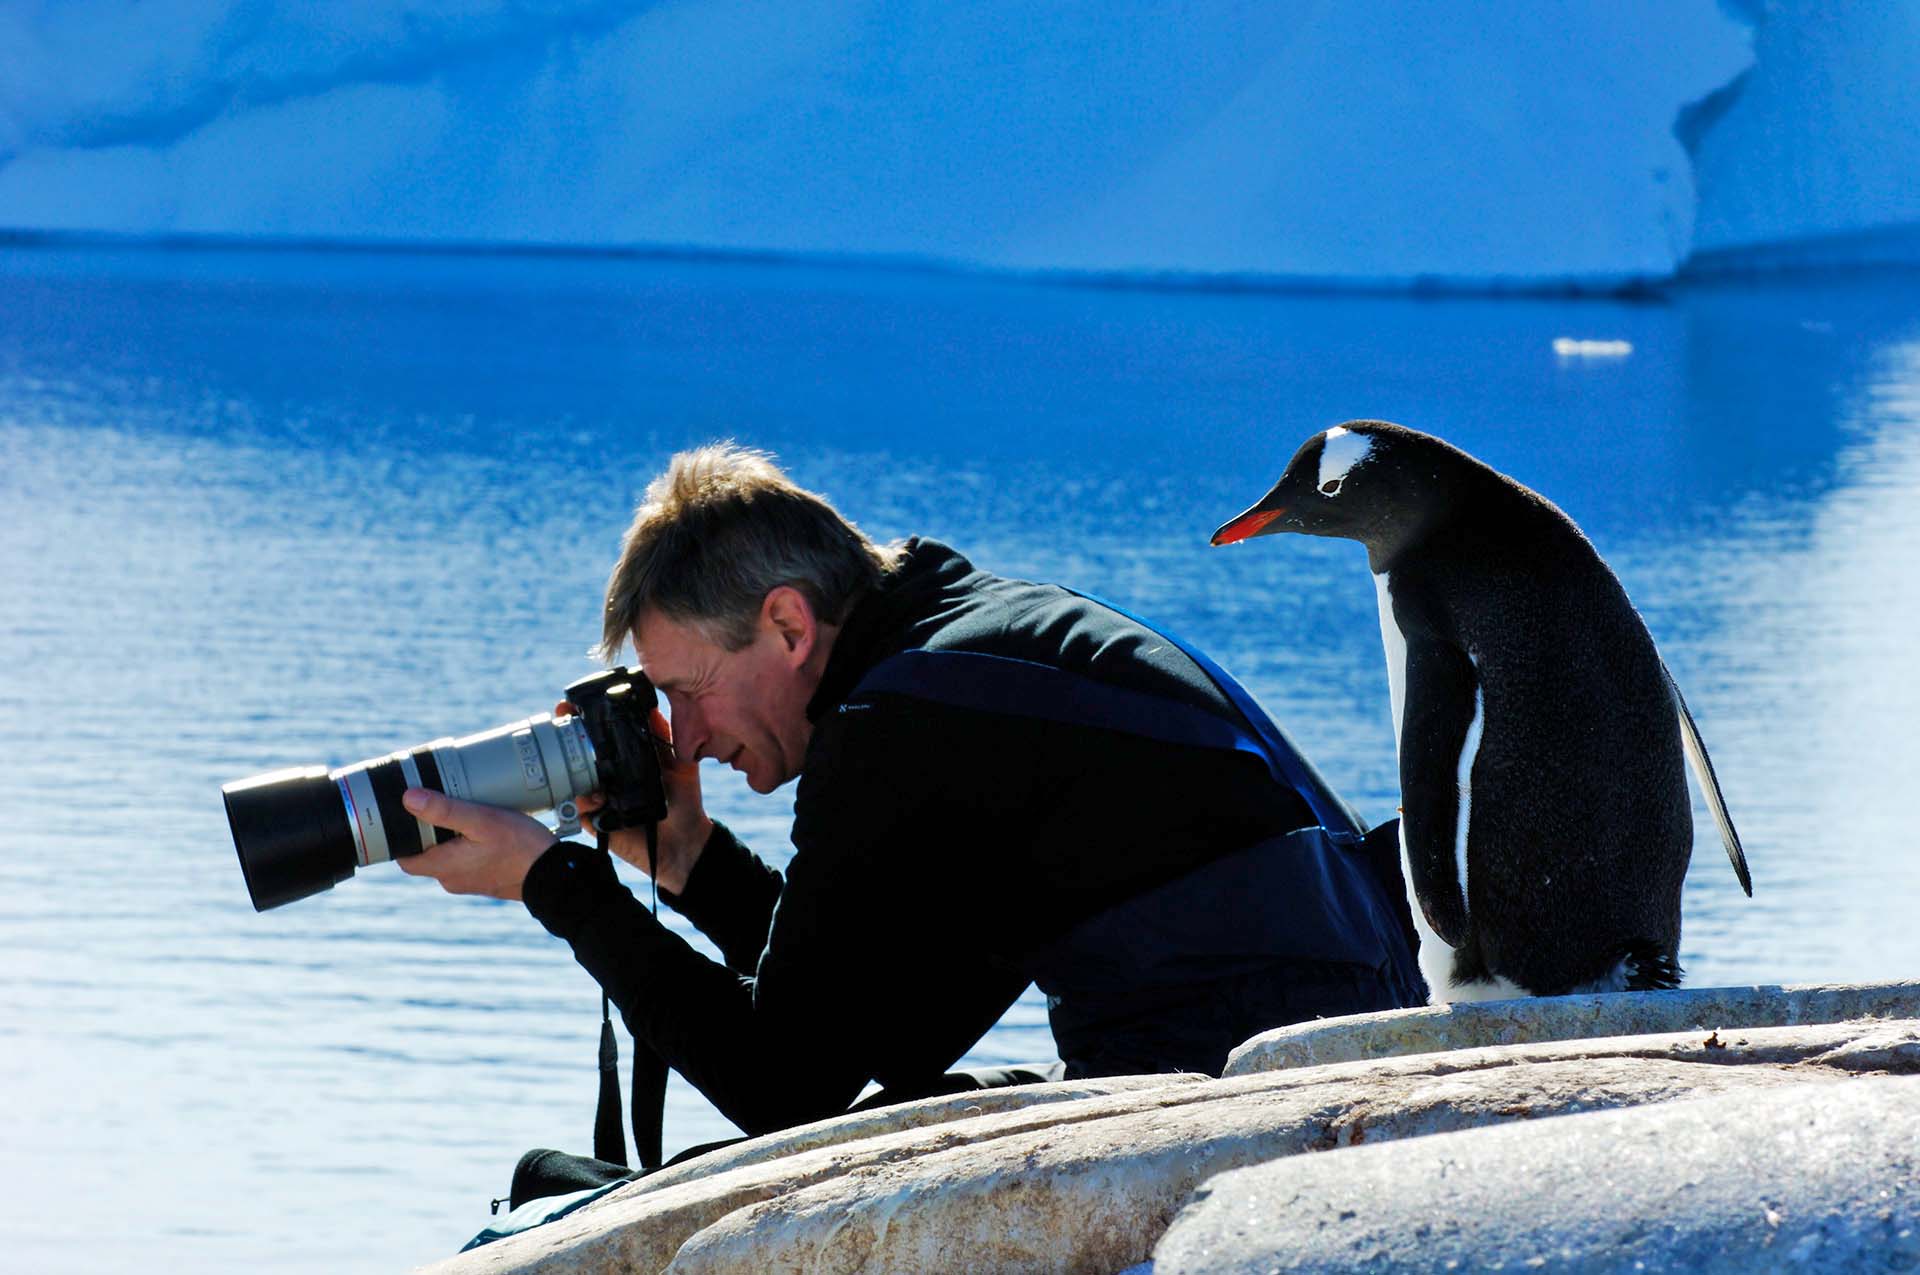 Gentoo penguin as if looking what a photographer is doing